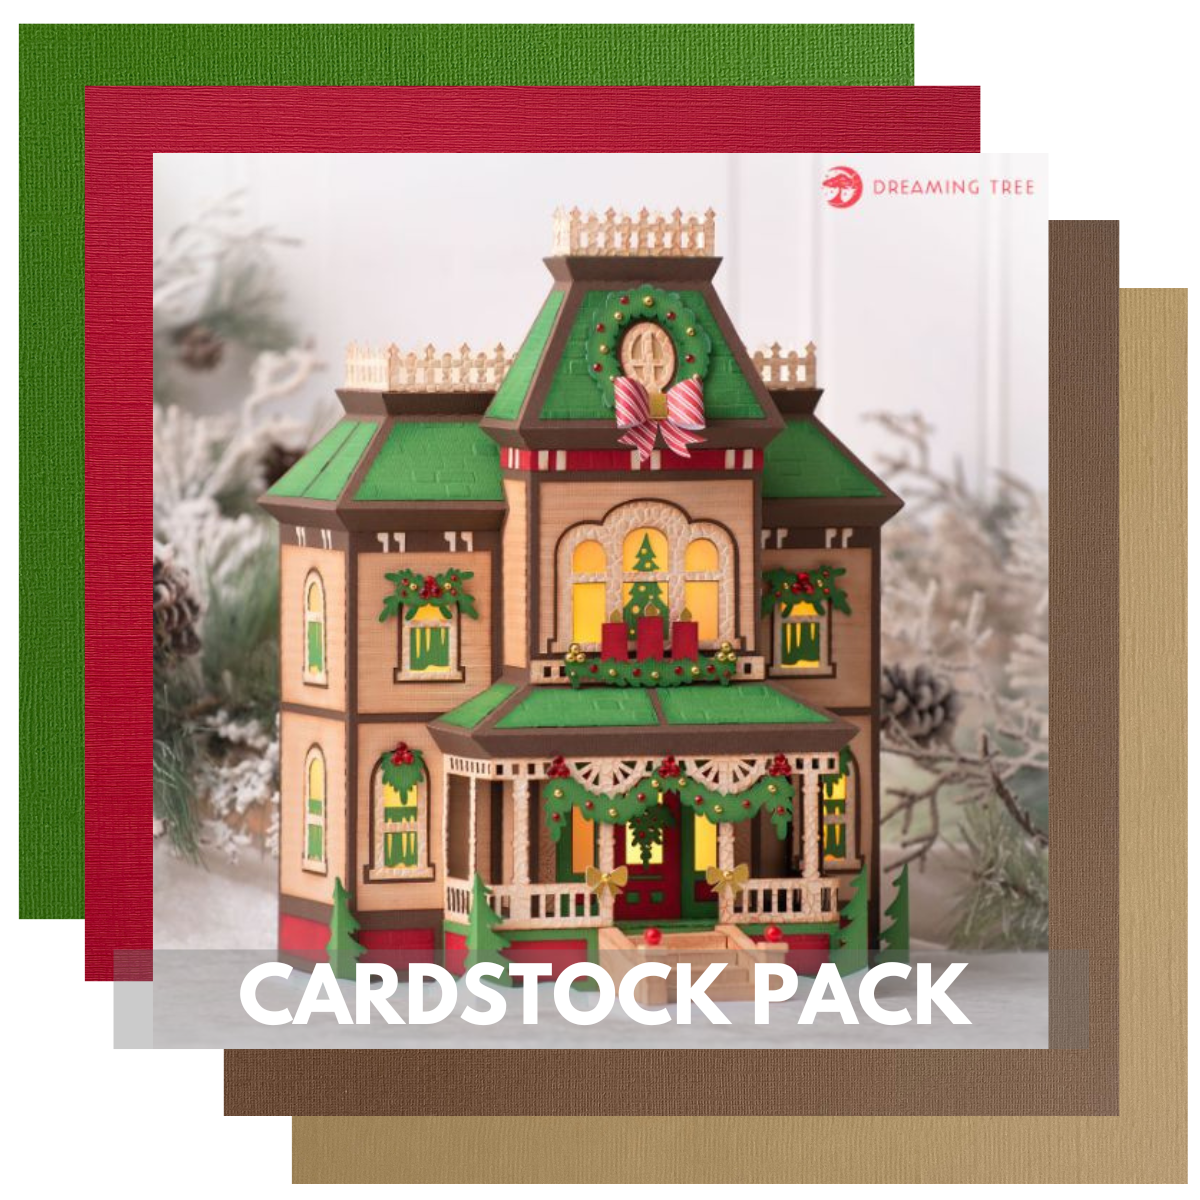 DREAMING TREE MOTHER BATES CHRISTMAS HOUSE CARDSTOCK KIT - 32 Sheets - 12x12 Cardstock Shop